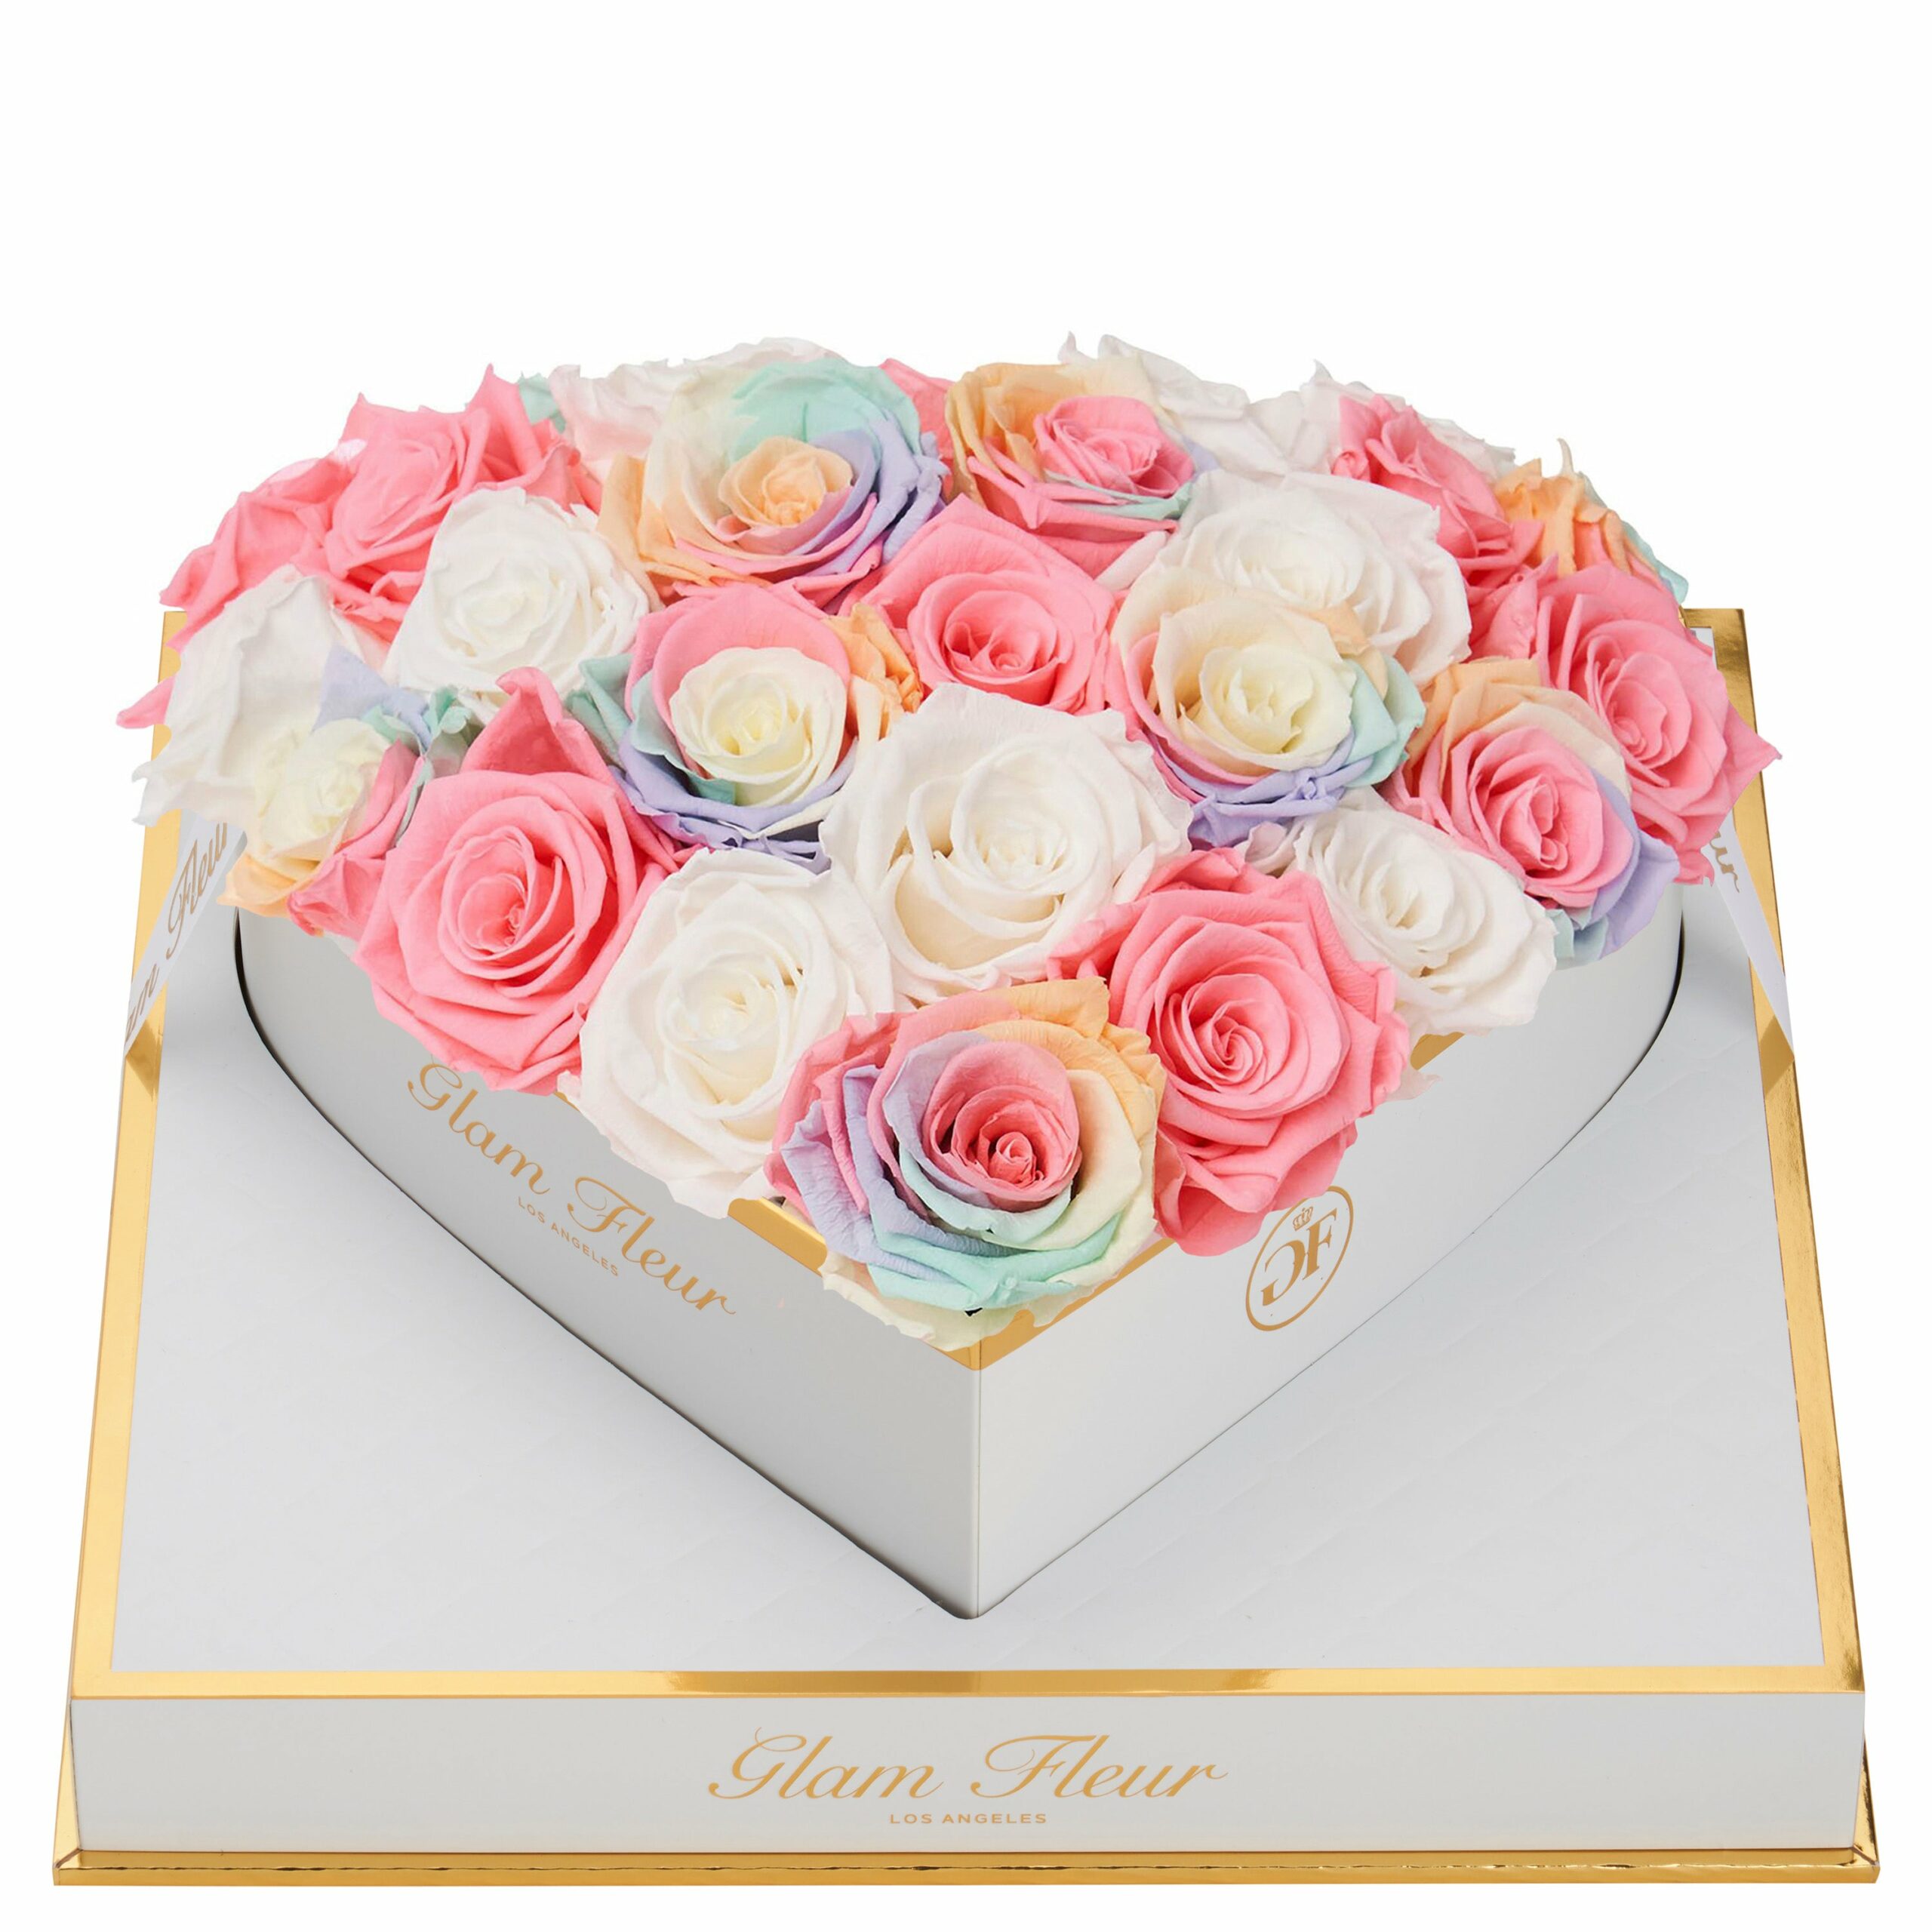 Candy Rainbow, Light Pink & White Roses in Heart Box